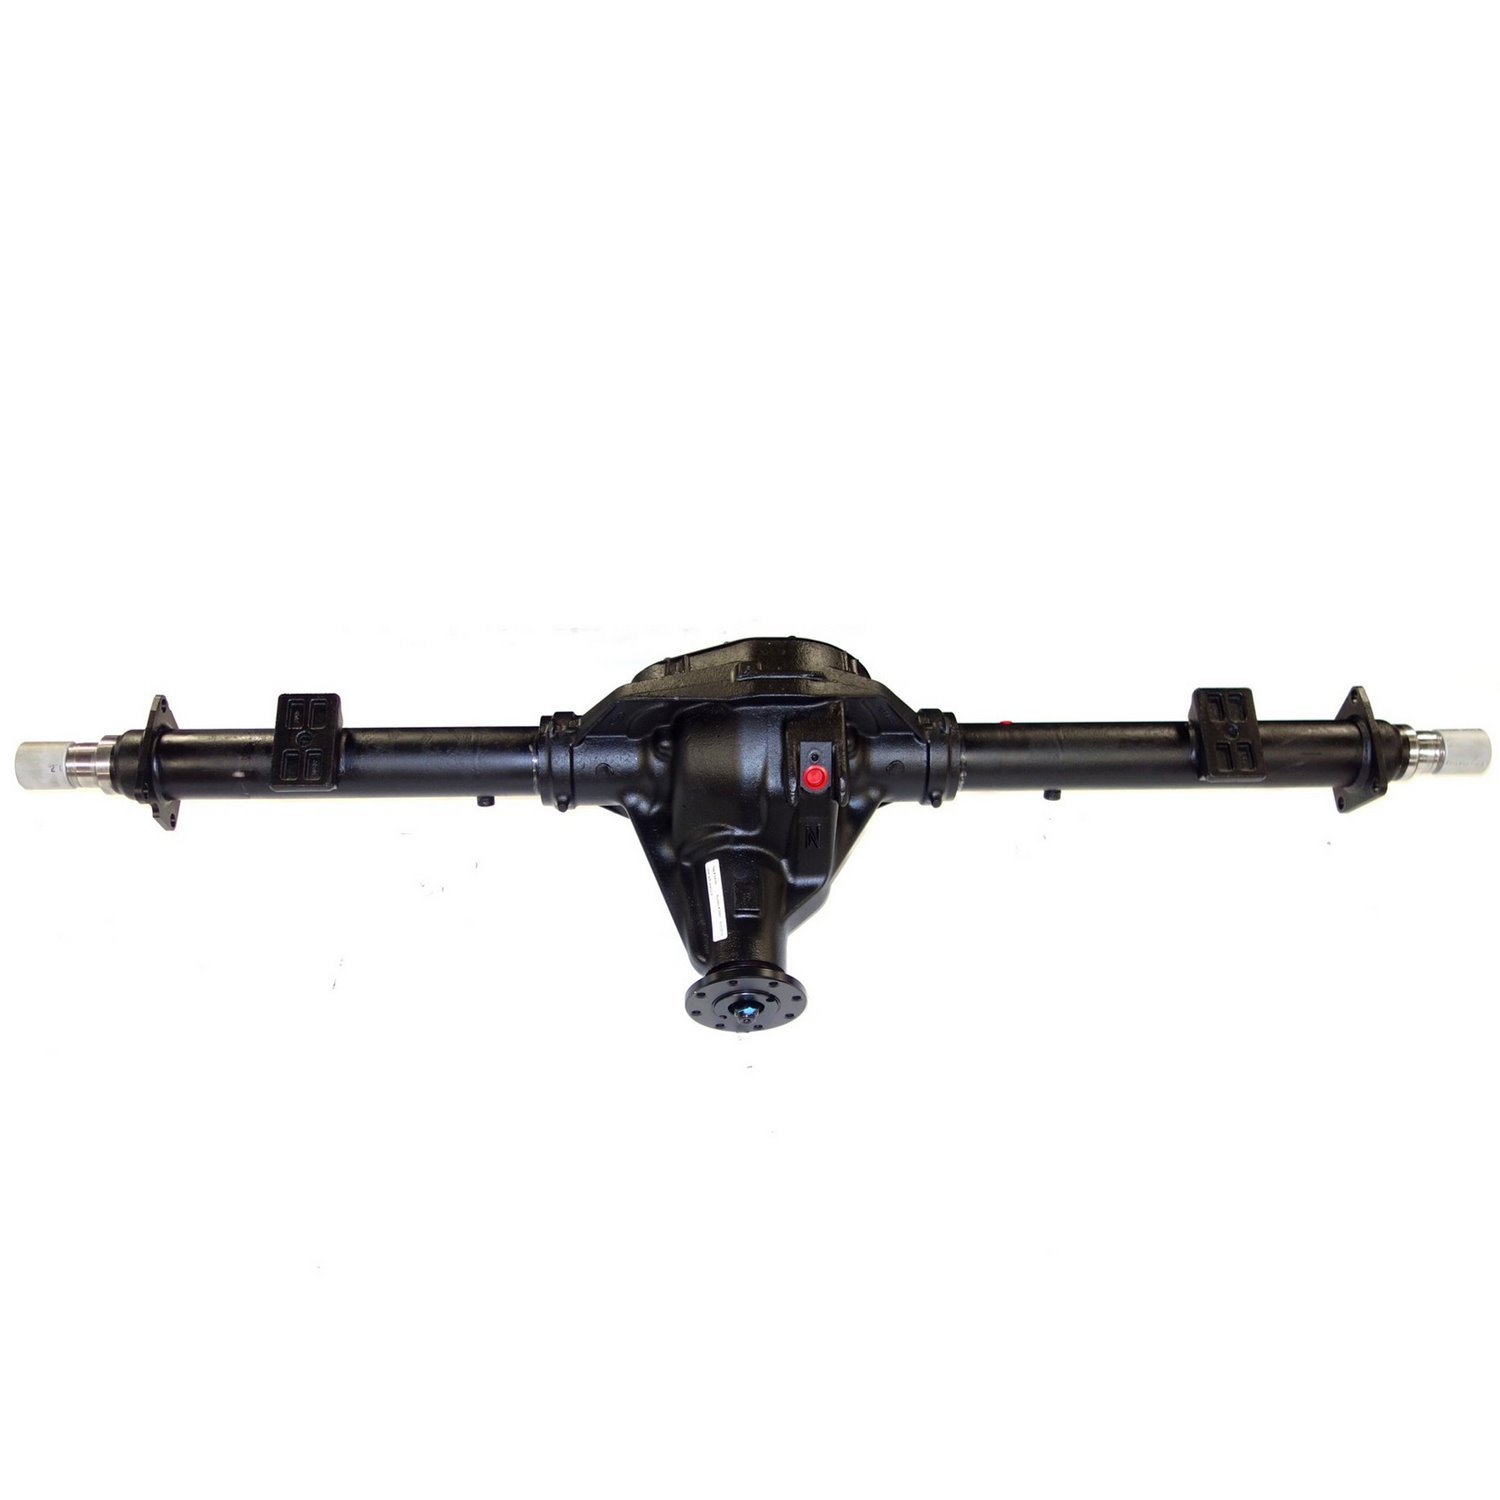 Remanufactured Complete Axle Assembly for 10.5" 08-10 F250 & F350, 6.4l, SRW, 3.31